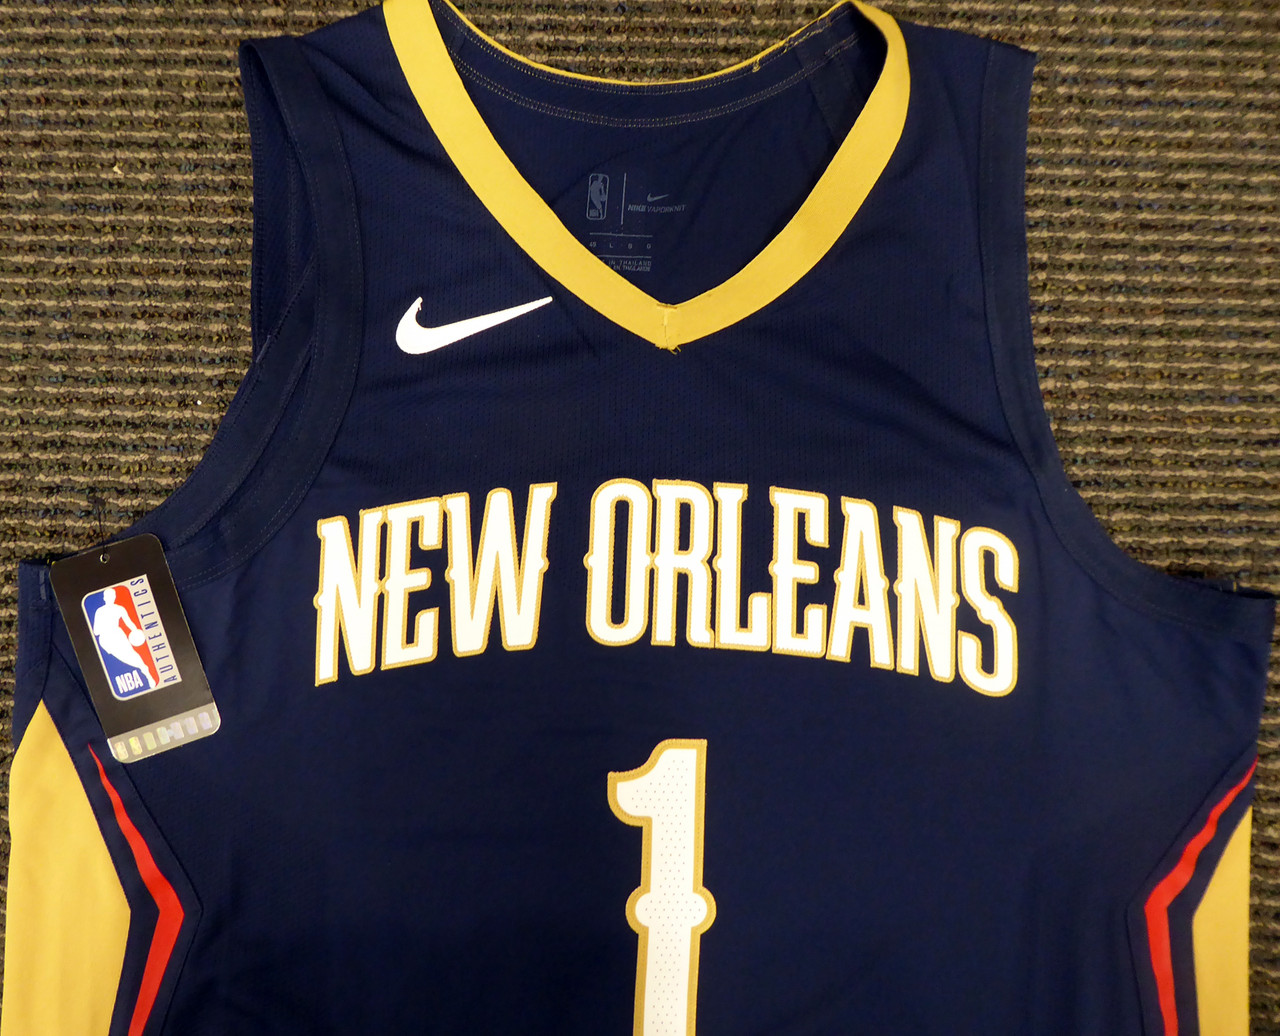 Zion Williamson New Orleans Pelicans Nike Authentic Player Jersey